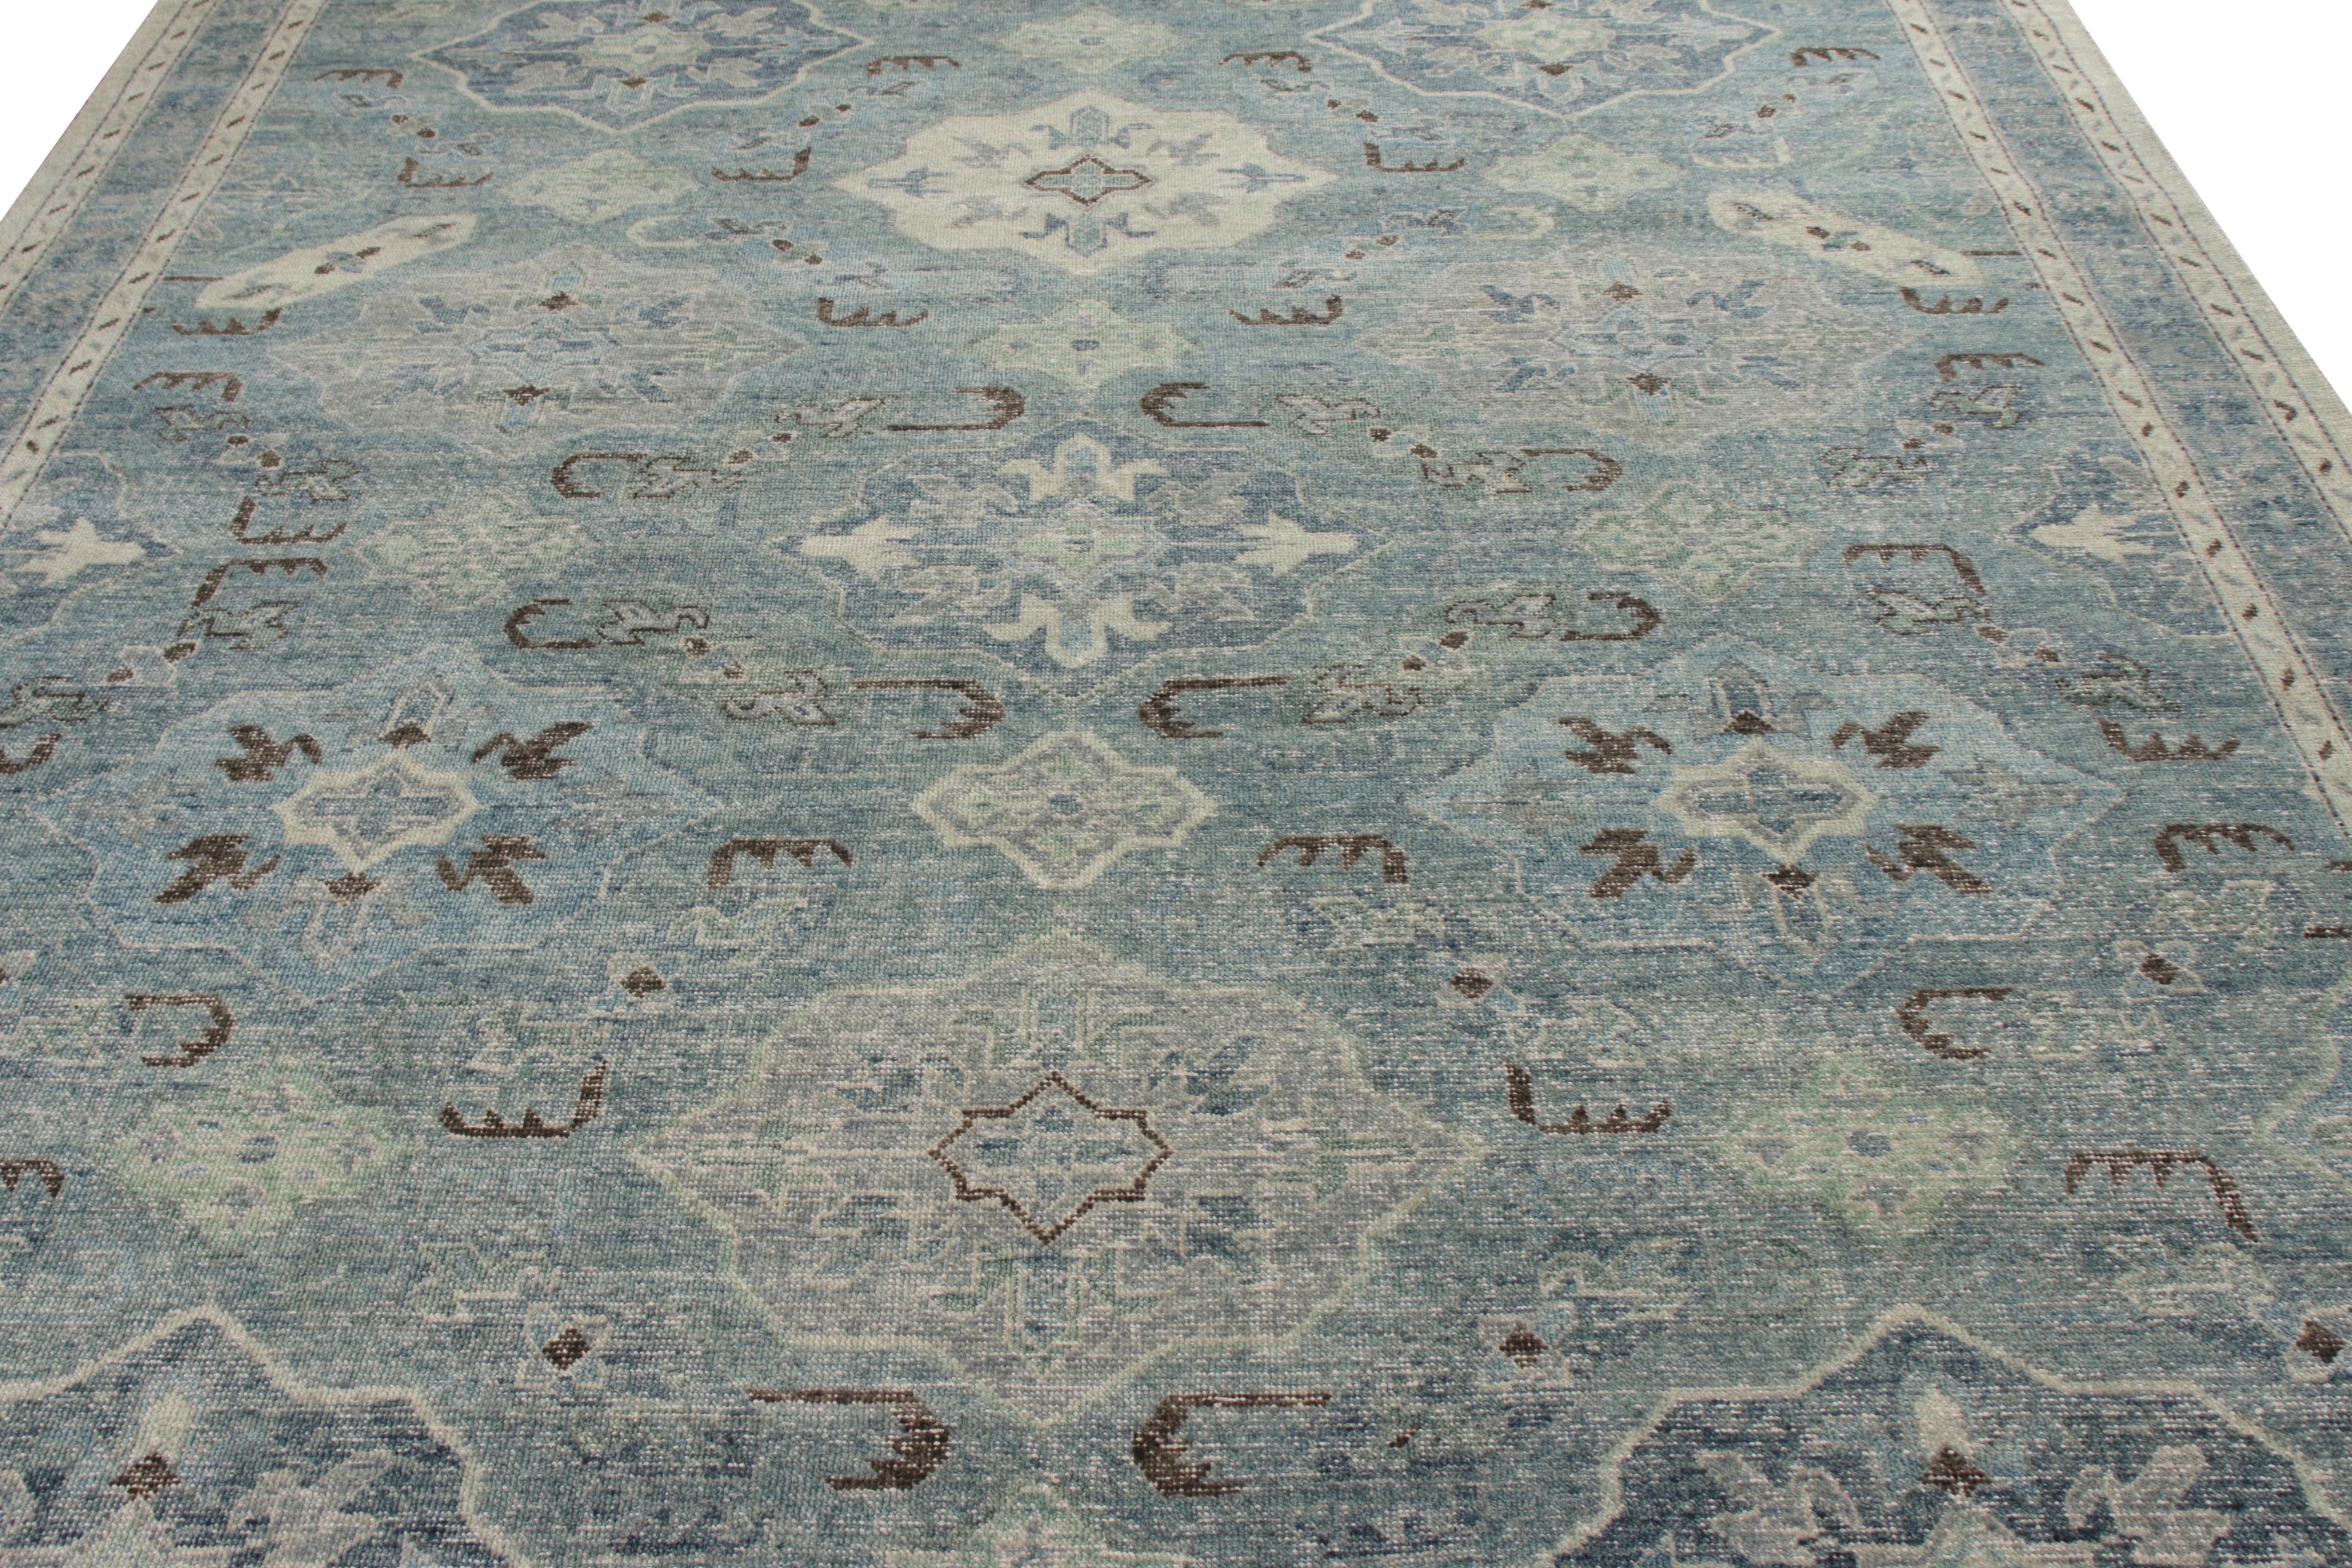 A custom rug design from the classic selections of Rug & Kilim’s Homage Collection—hand knotted in wool with a shabby-chic, distressed texture. This 9x12 edition exemplifies the detail and color bank this collection enjoys, particularly in this